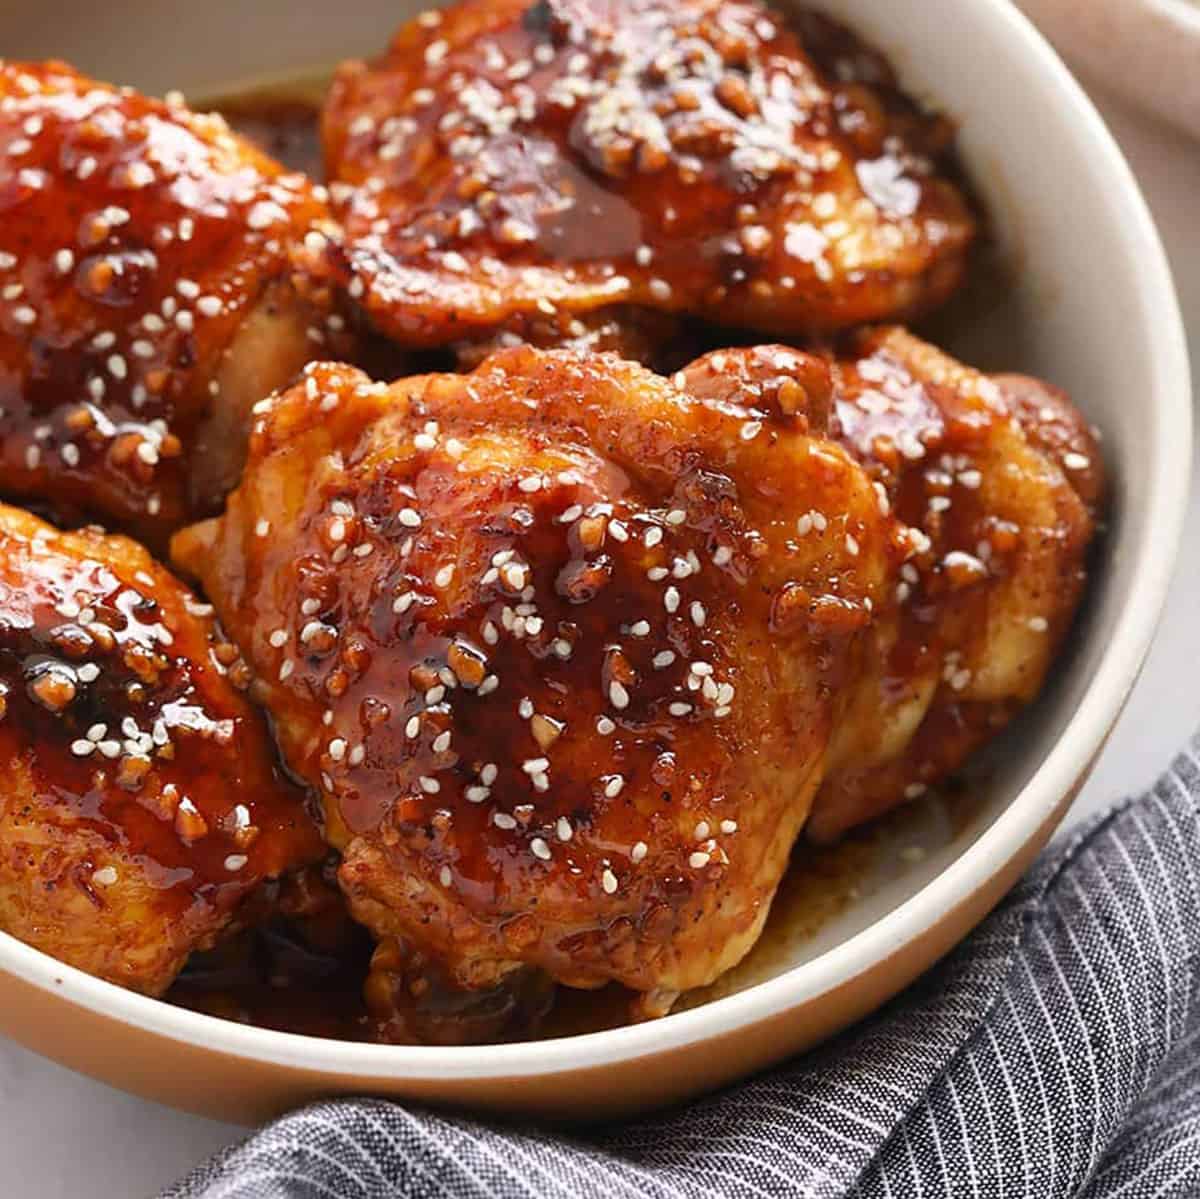 https://fitfoodiefinds.com/wp-content/uploads/2021/08/chickenthighs.jpg